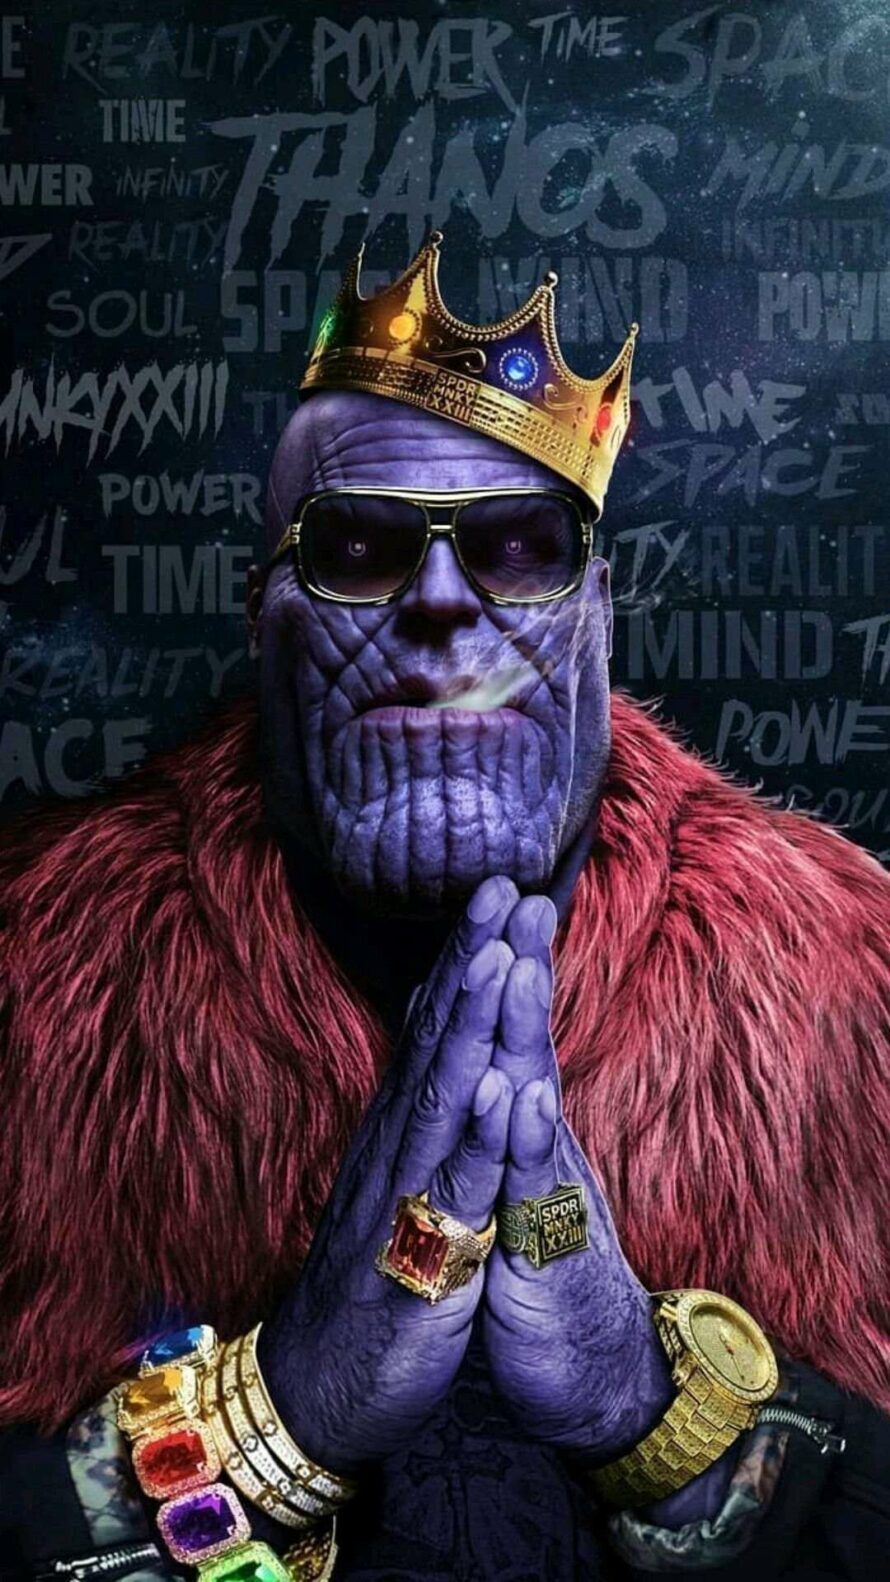 Avengers Thanos Hip Hop Crown Gold Chains Rings Infinity Stones